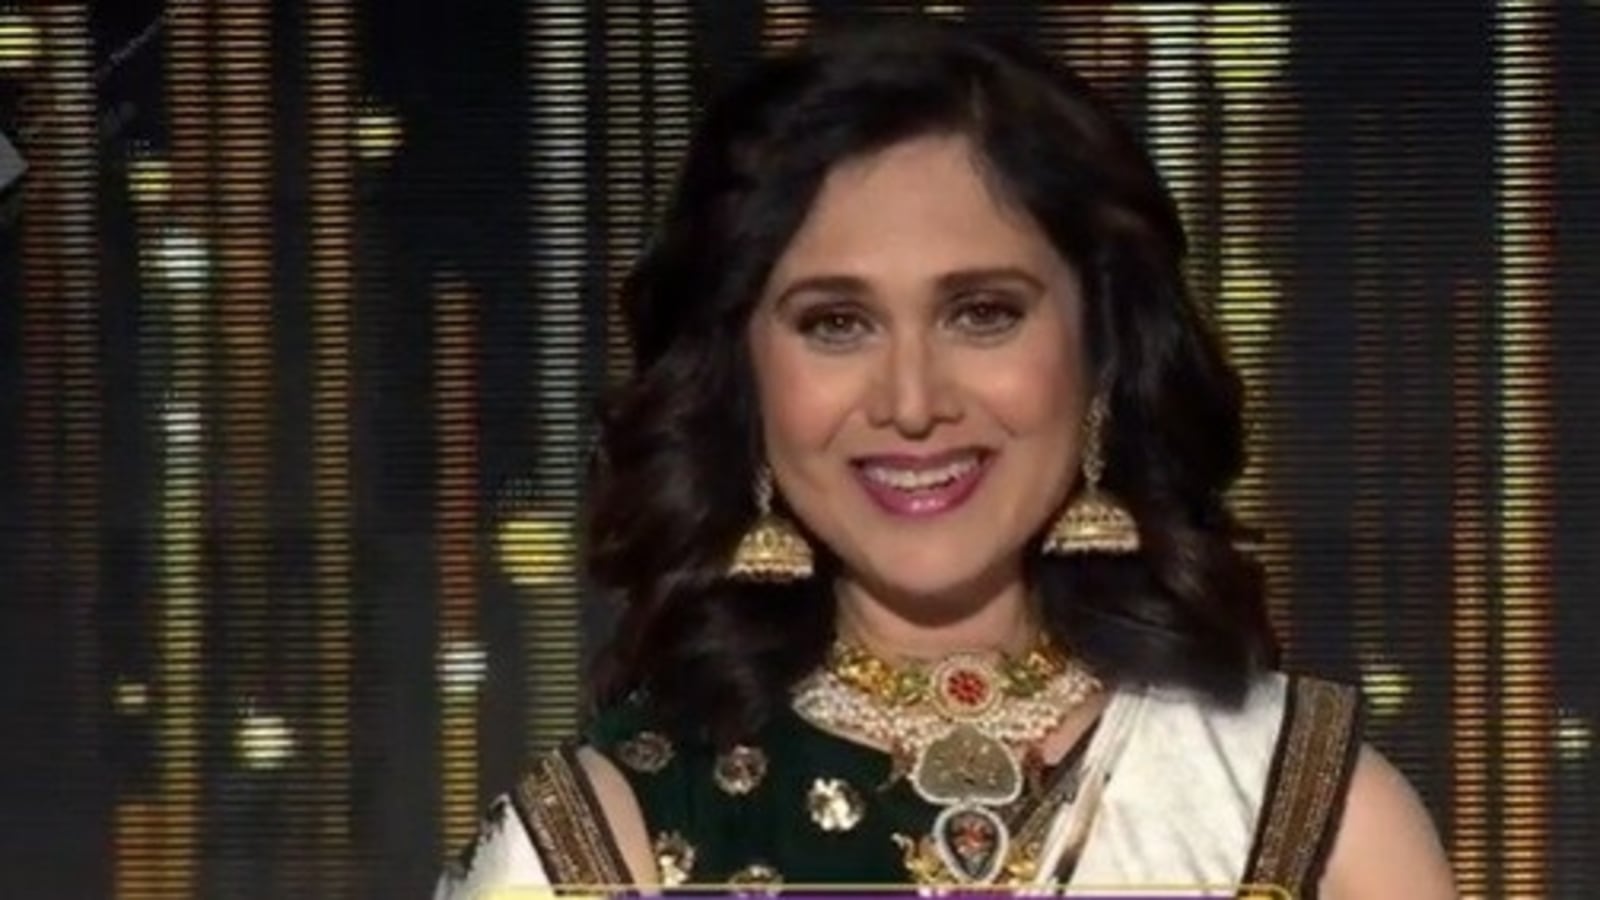 Meenakshi Seshadri says she became a bawarchi after moving to US ...